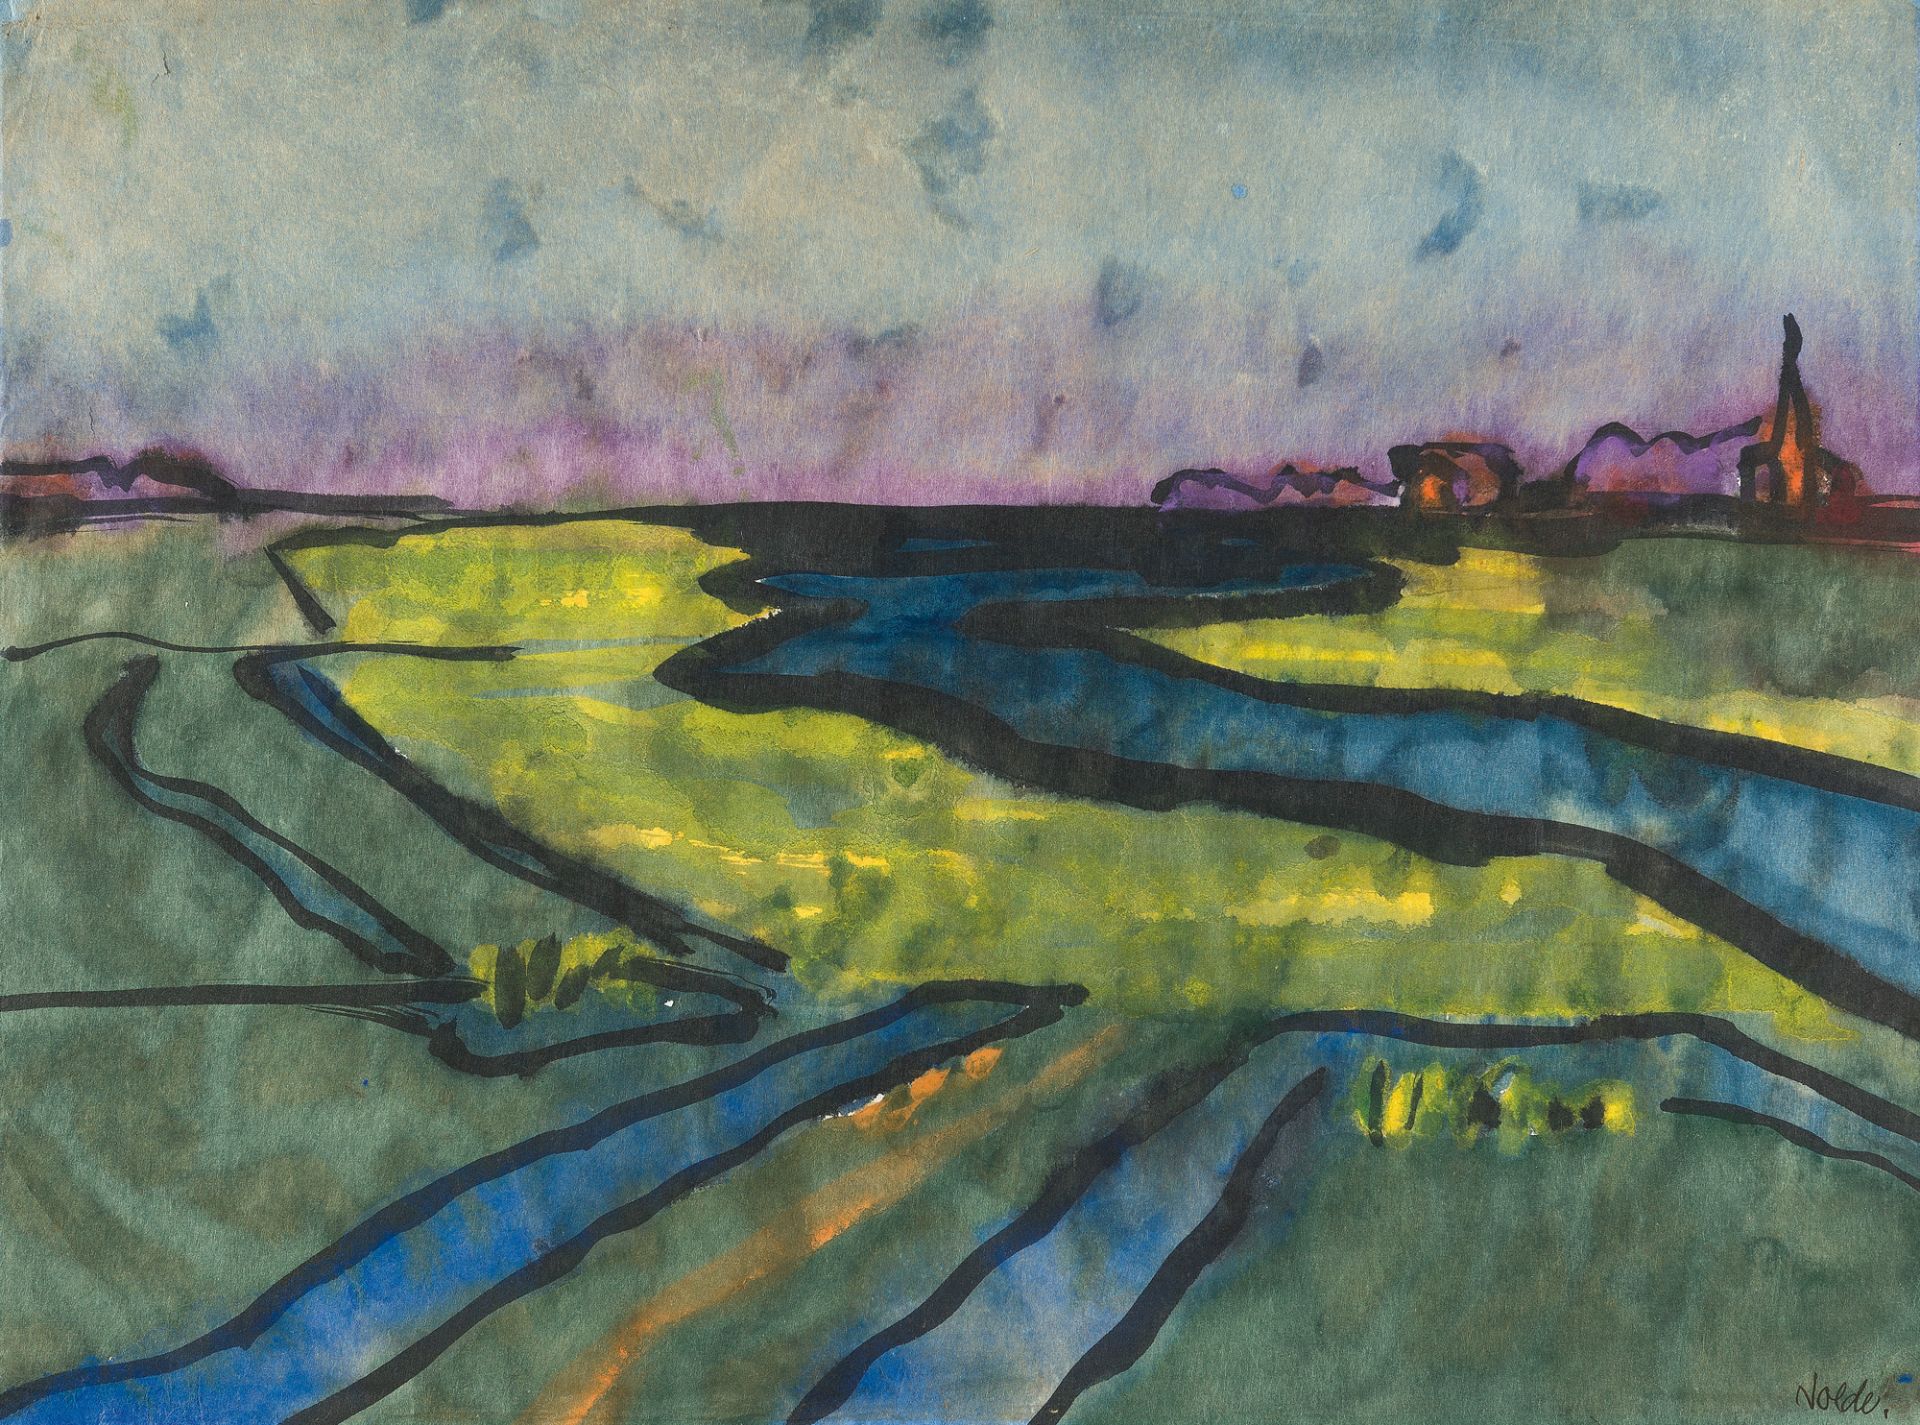 Emil Nolde, Marsh landscape.Watercolour and Indian ink on Japanese laid paper. (Around 1920/22). Ca.